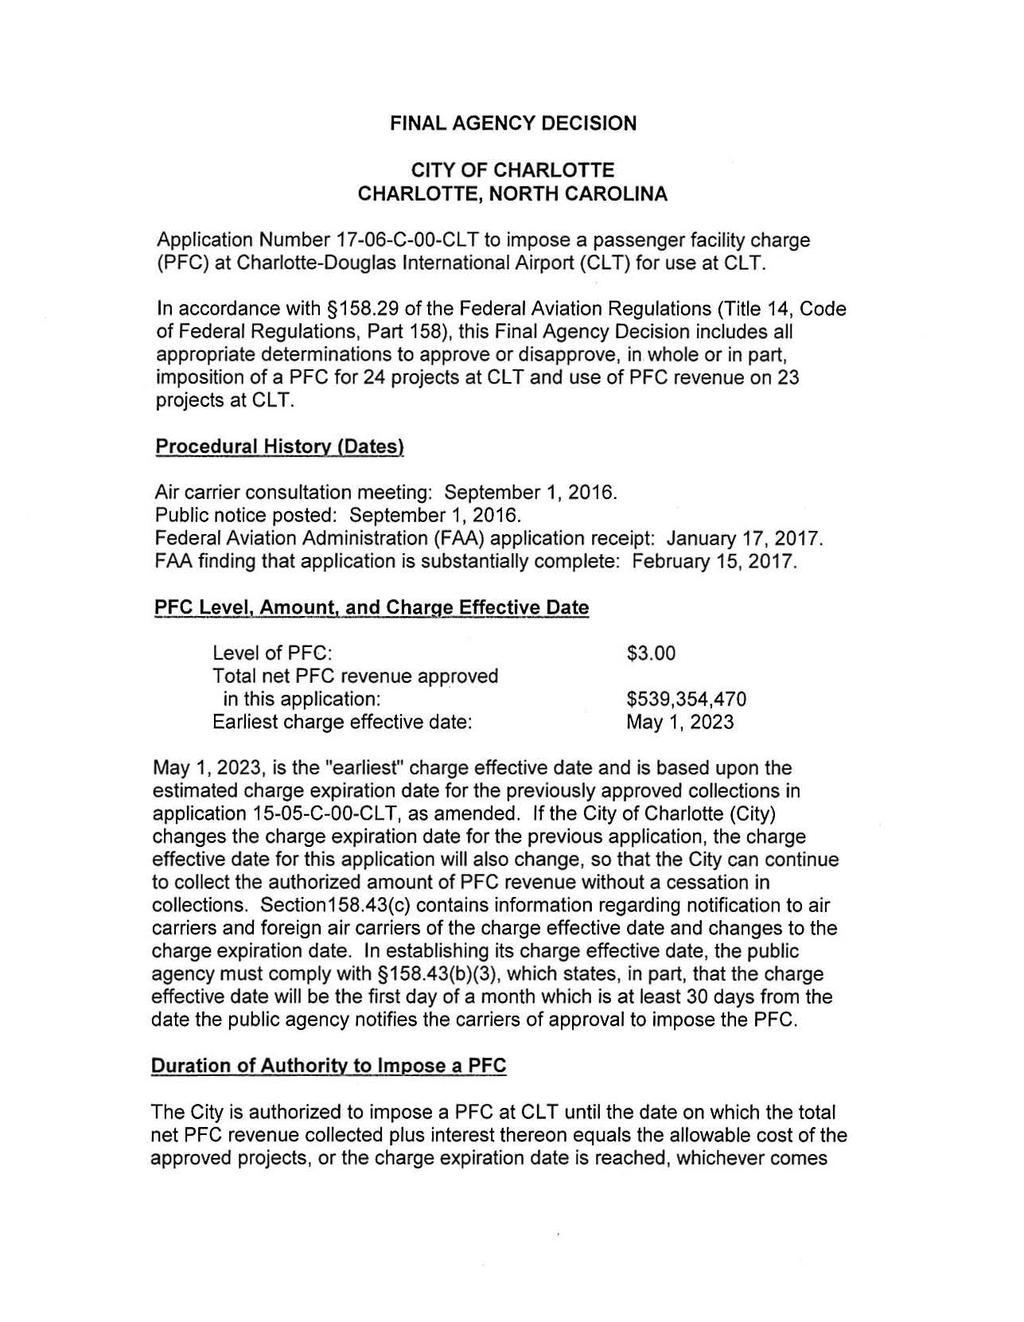 FINAL AGENCY DECISION CITY OF CHARLOTTE CHARLOTTE, NORTH CAROLINA Application Number 17-06-C-00-CL T to impose a passenger facility charge (PFC) at Charlotte-Douglas International Airport (CL T) for